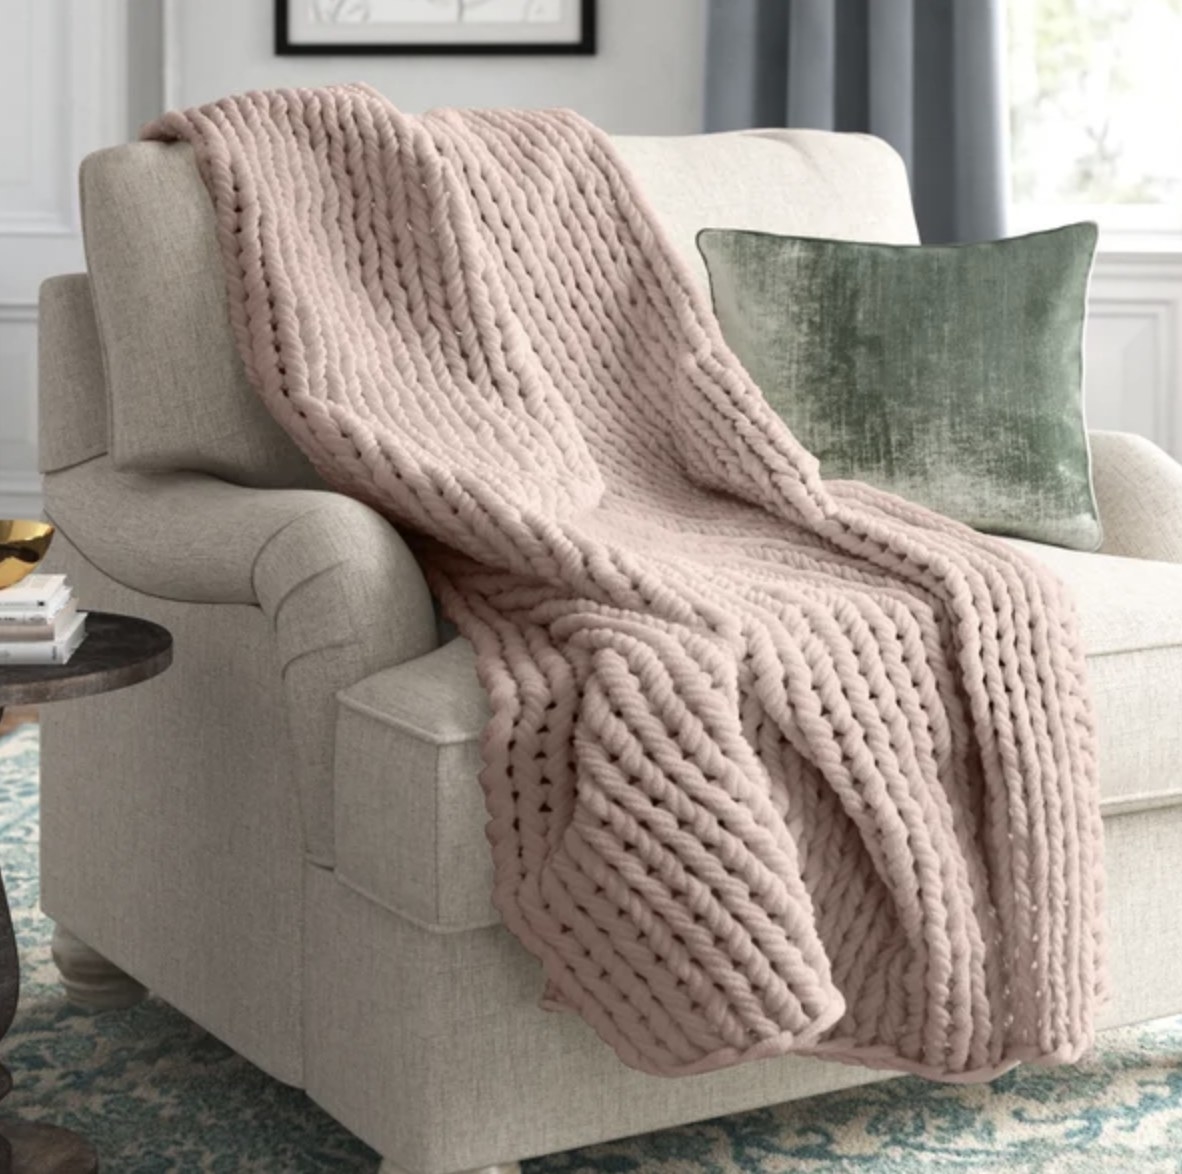 The pale pink blanket is hung against a chair